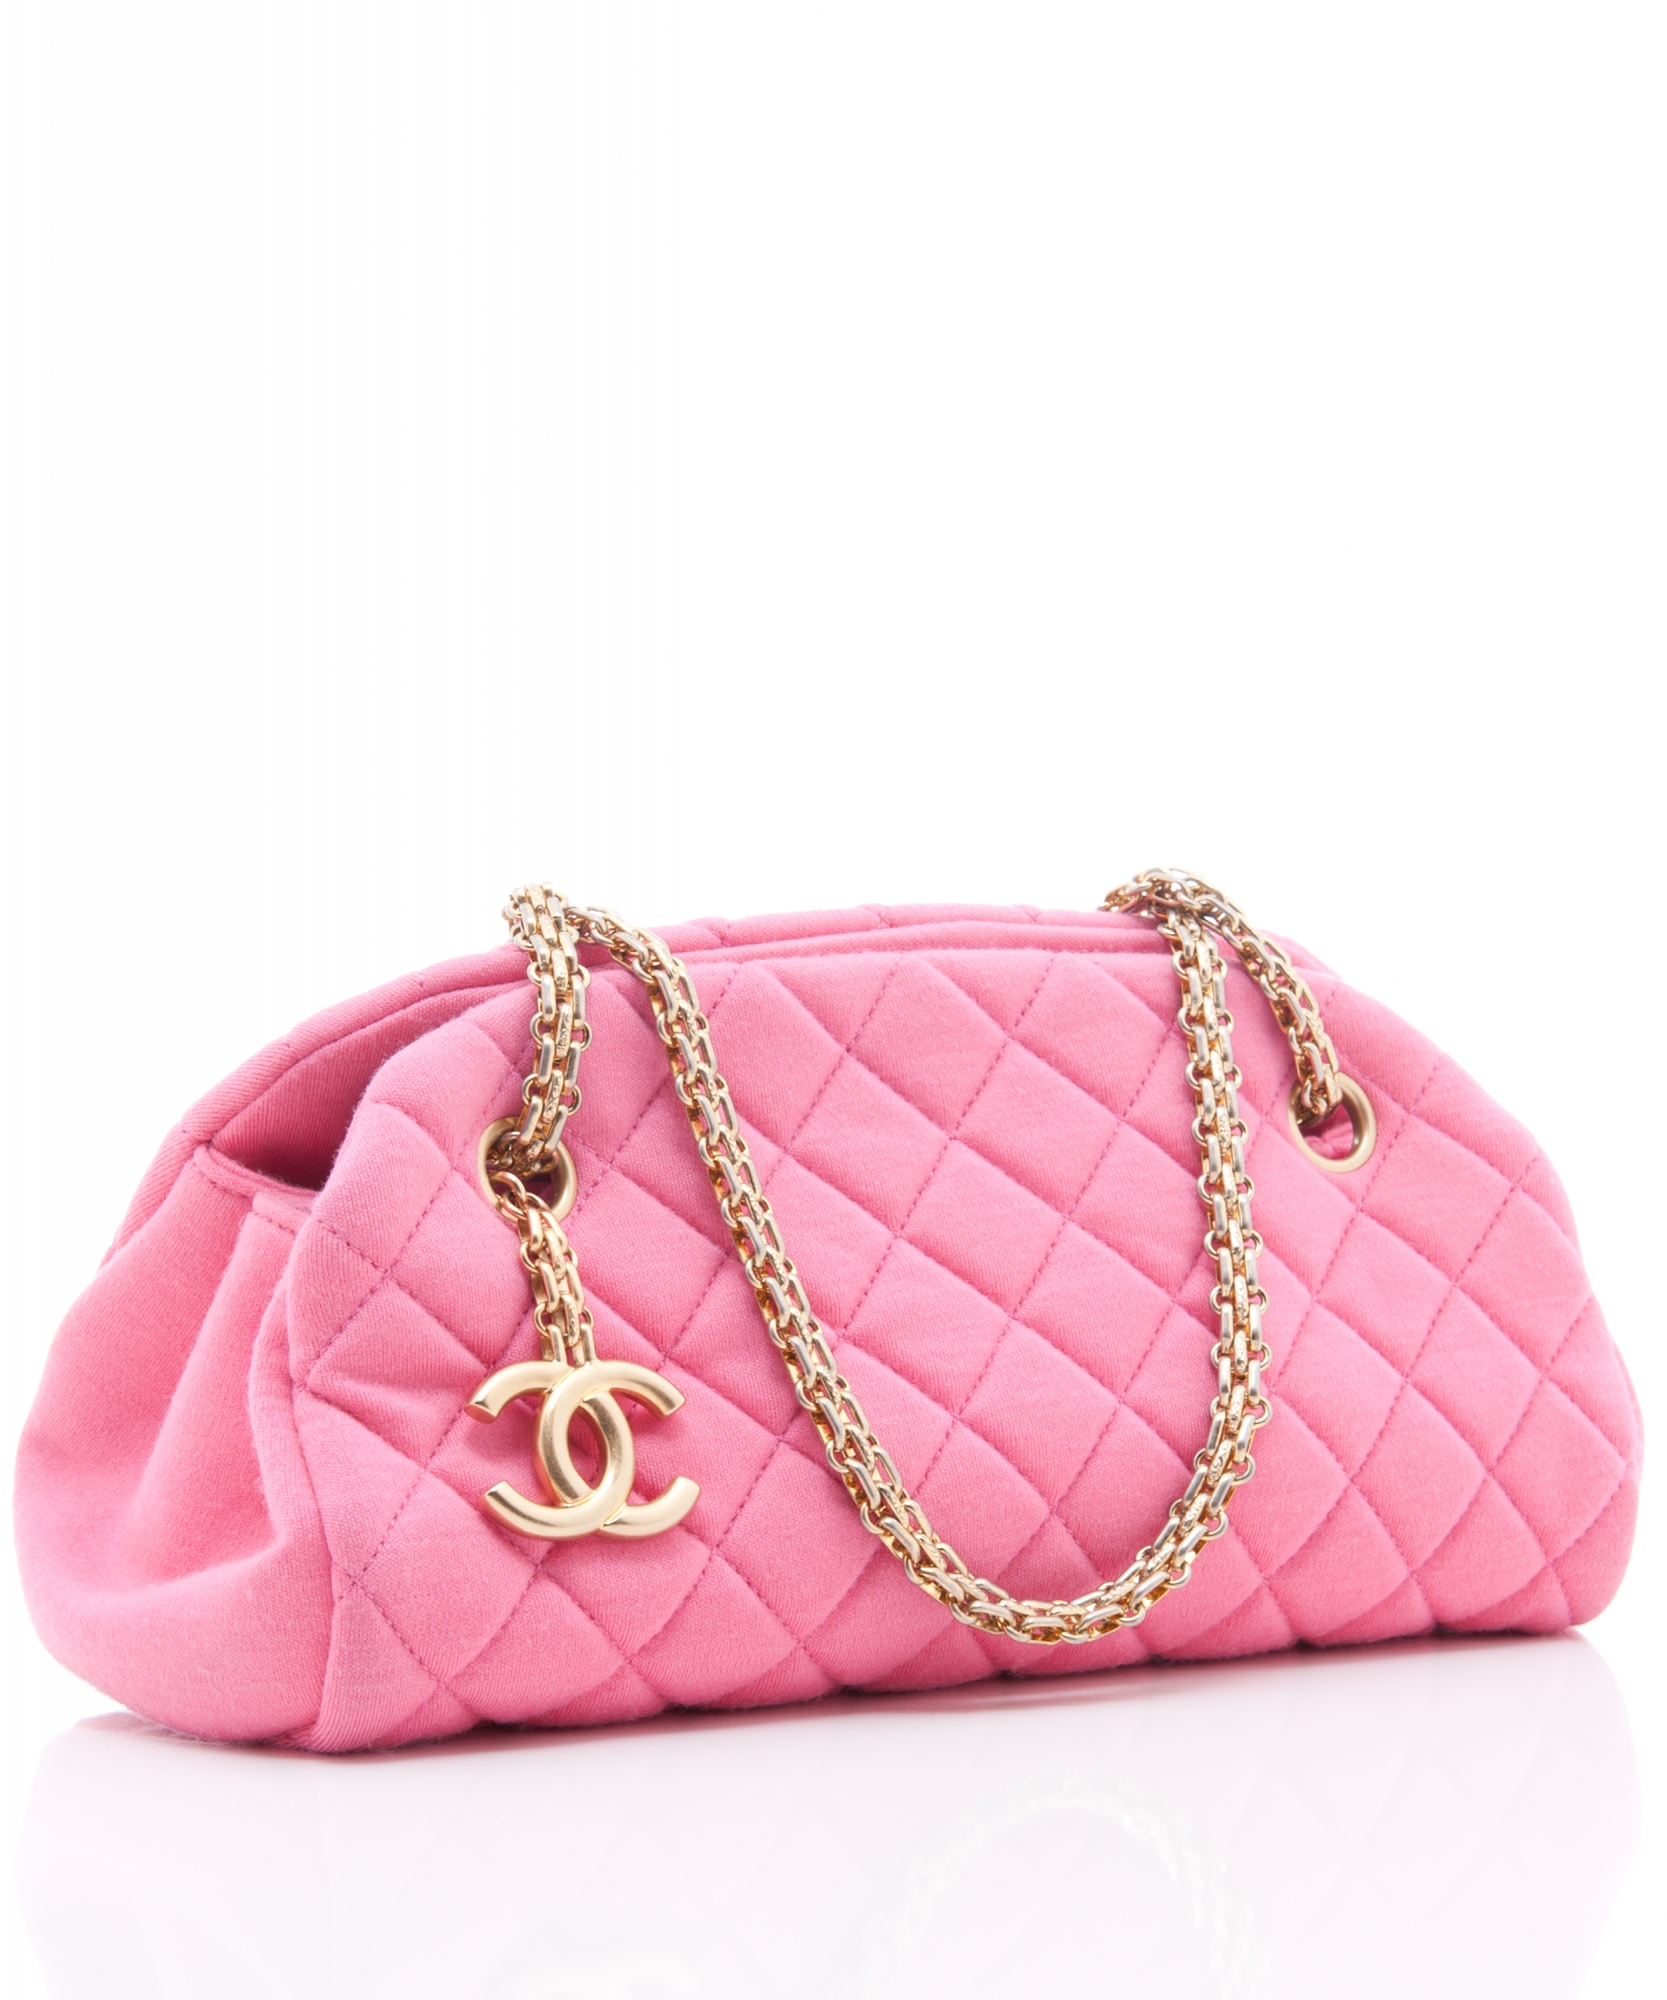 Chanel Pink Jersey 'Mademoiselle' Bag - Chanel